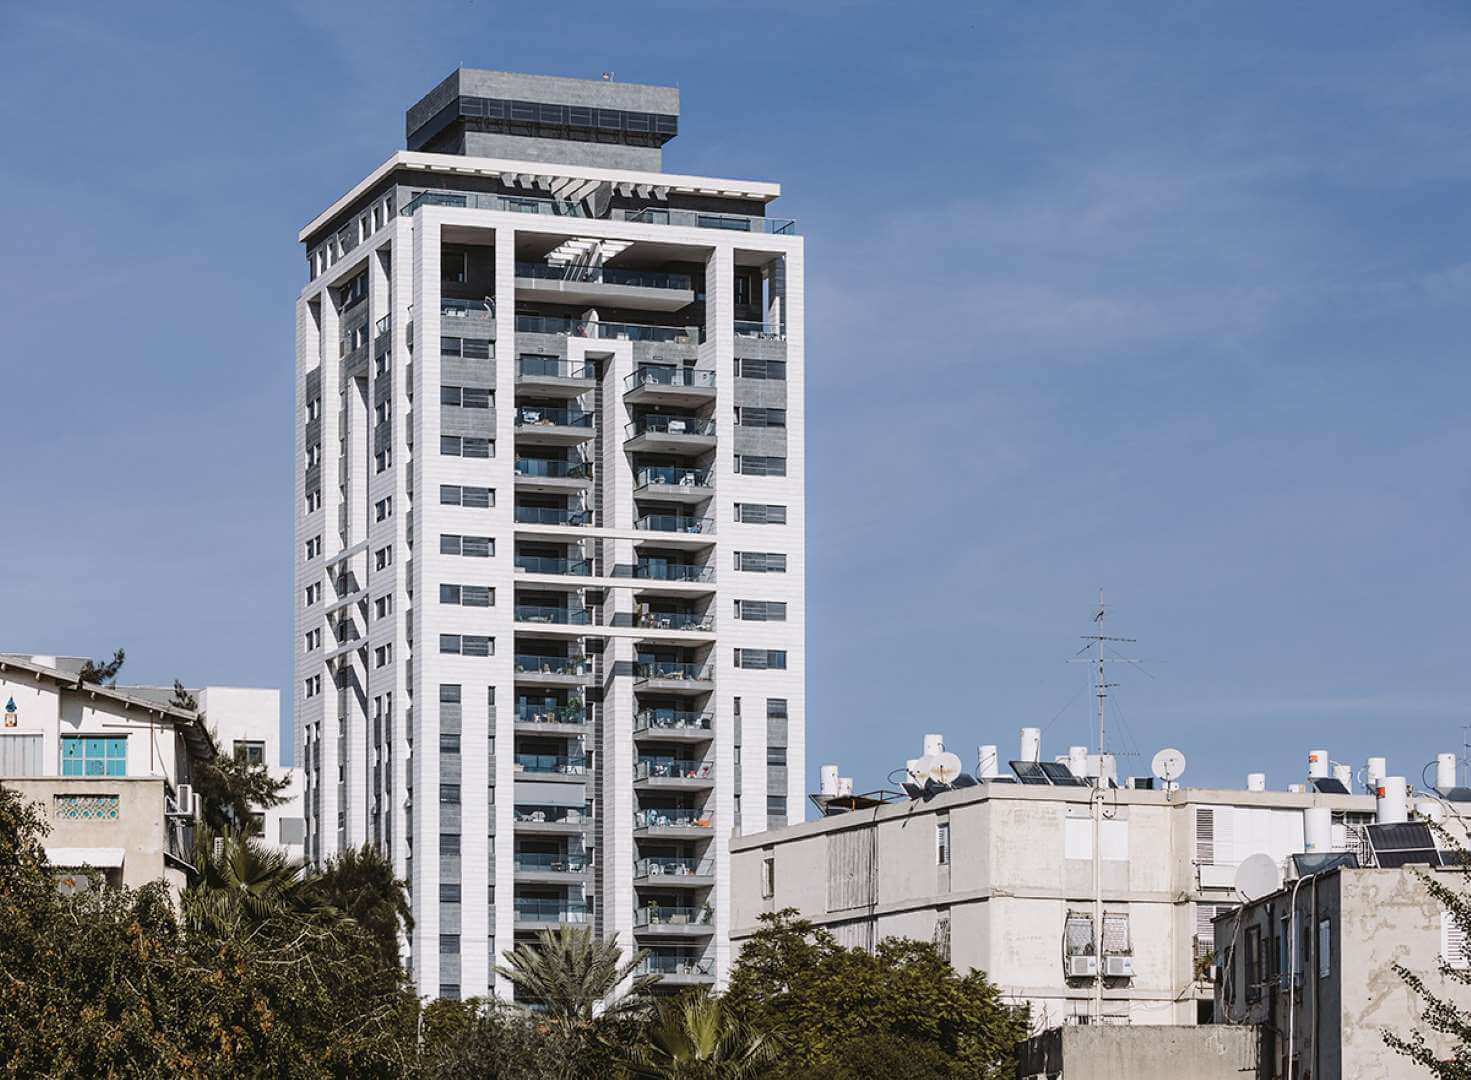 Photograph of a residential building from the UNIK ALPHA project in Ramat Gan